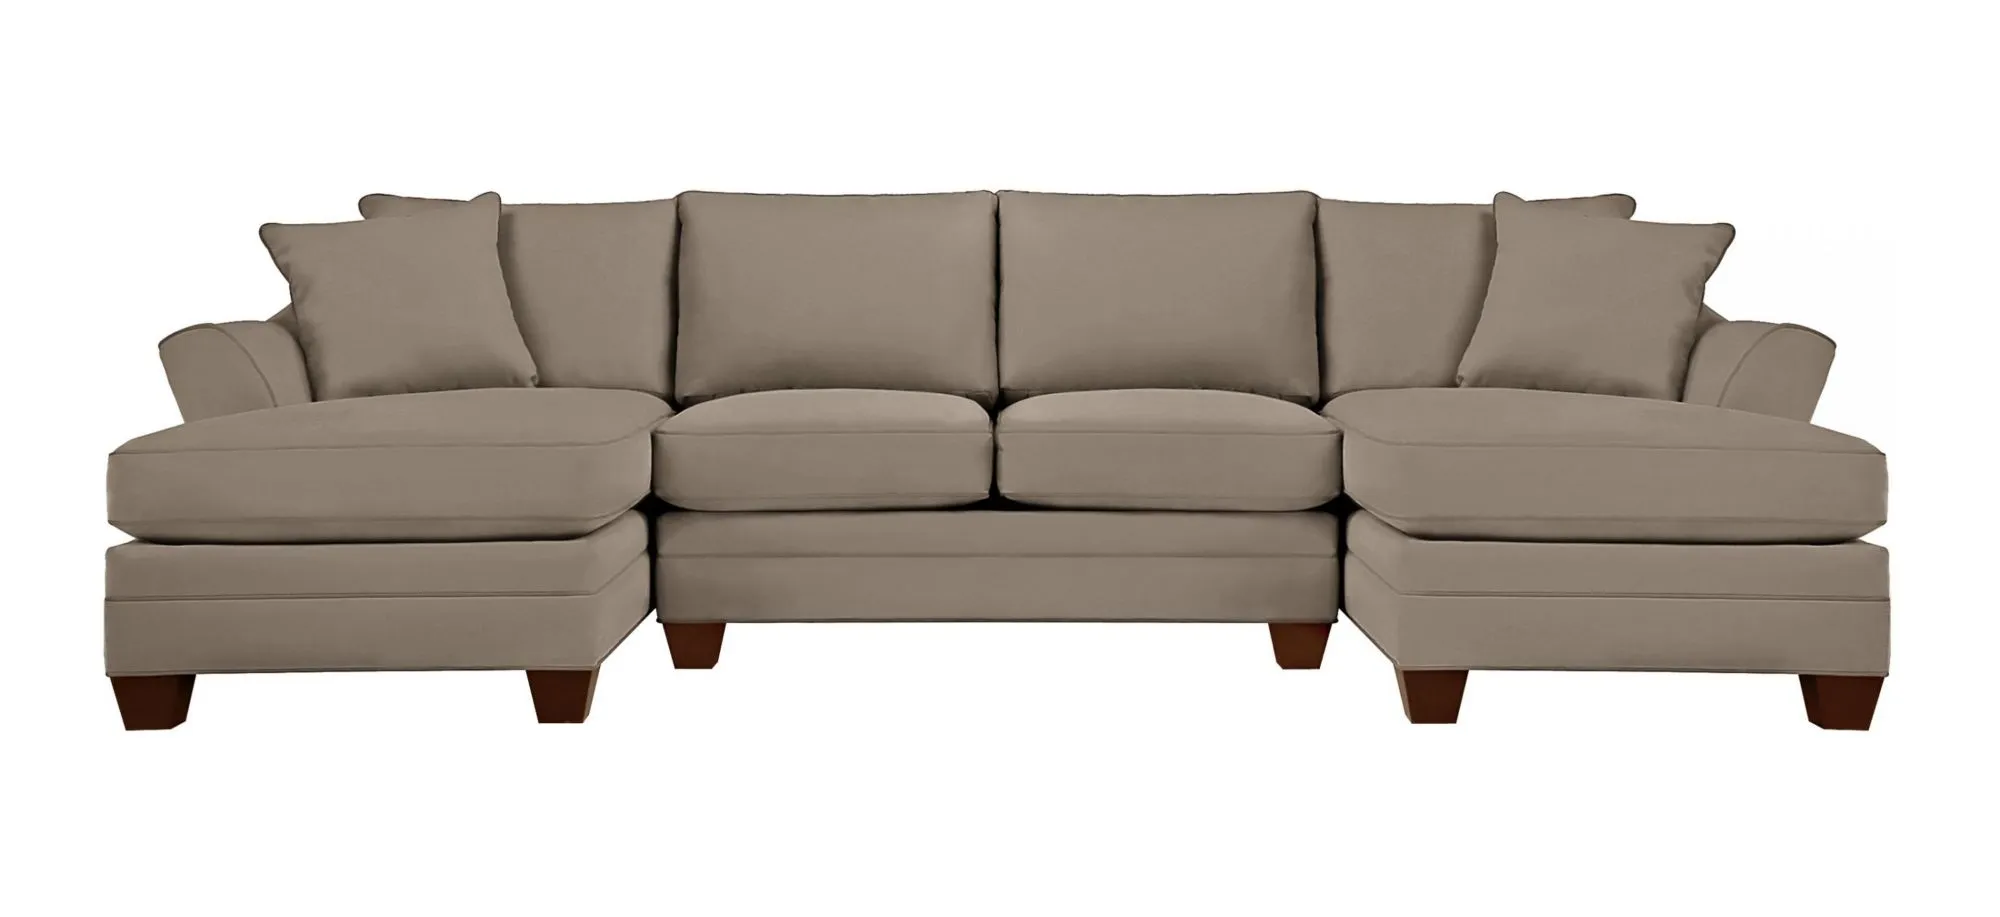 Foresthill 3-pc. Symmetrical Chaise Sectional Sofa in Suede So Soft Mineral by H.M. Richards